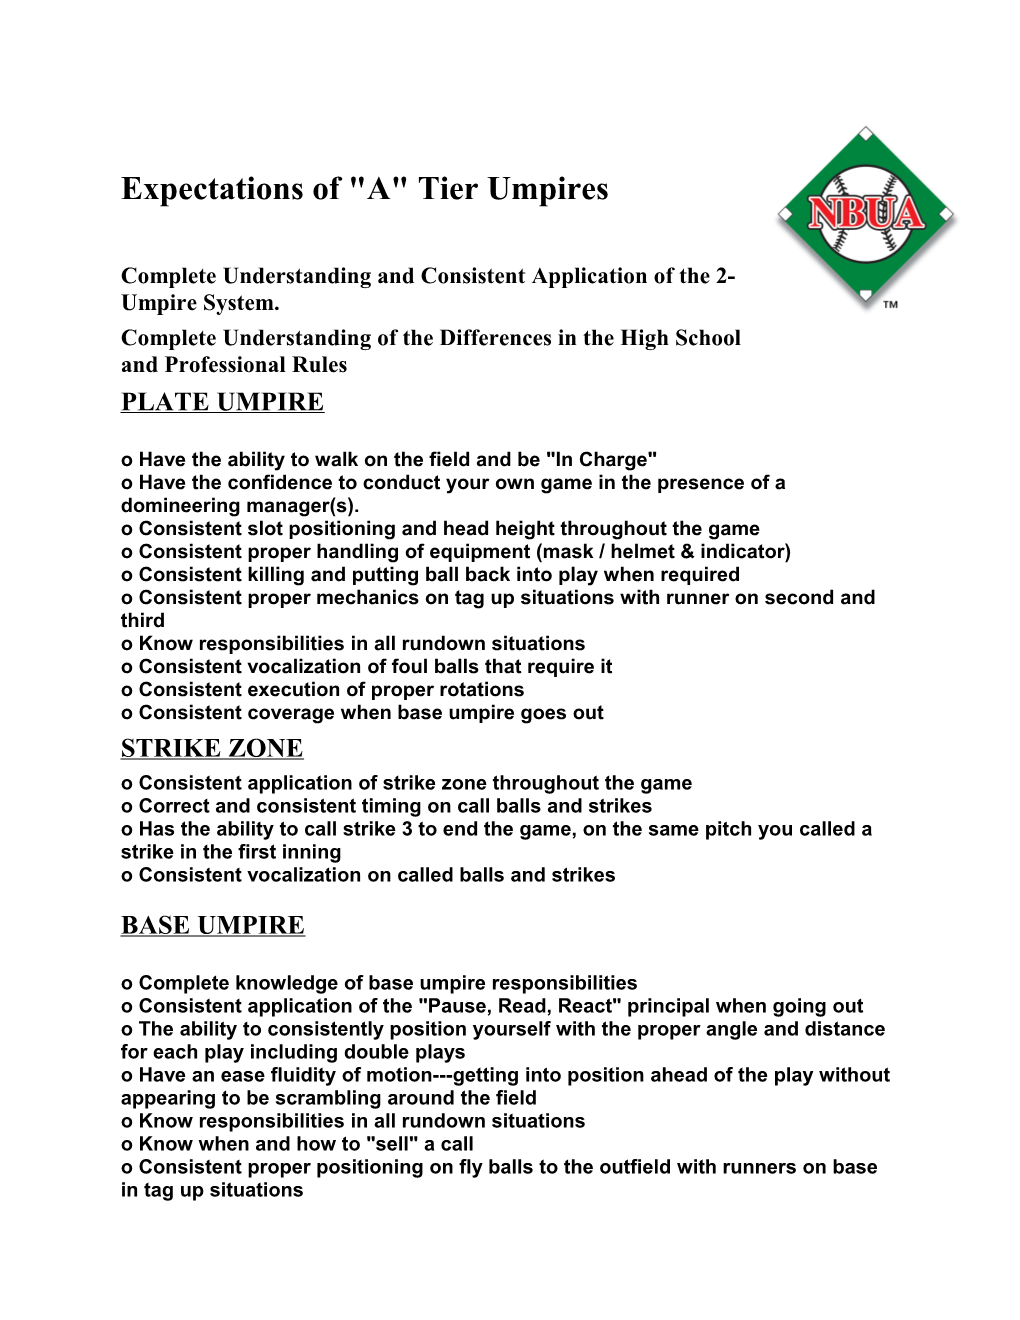 Complete Understanding and Consistent Application of the 2-Umpire System